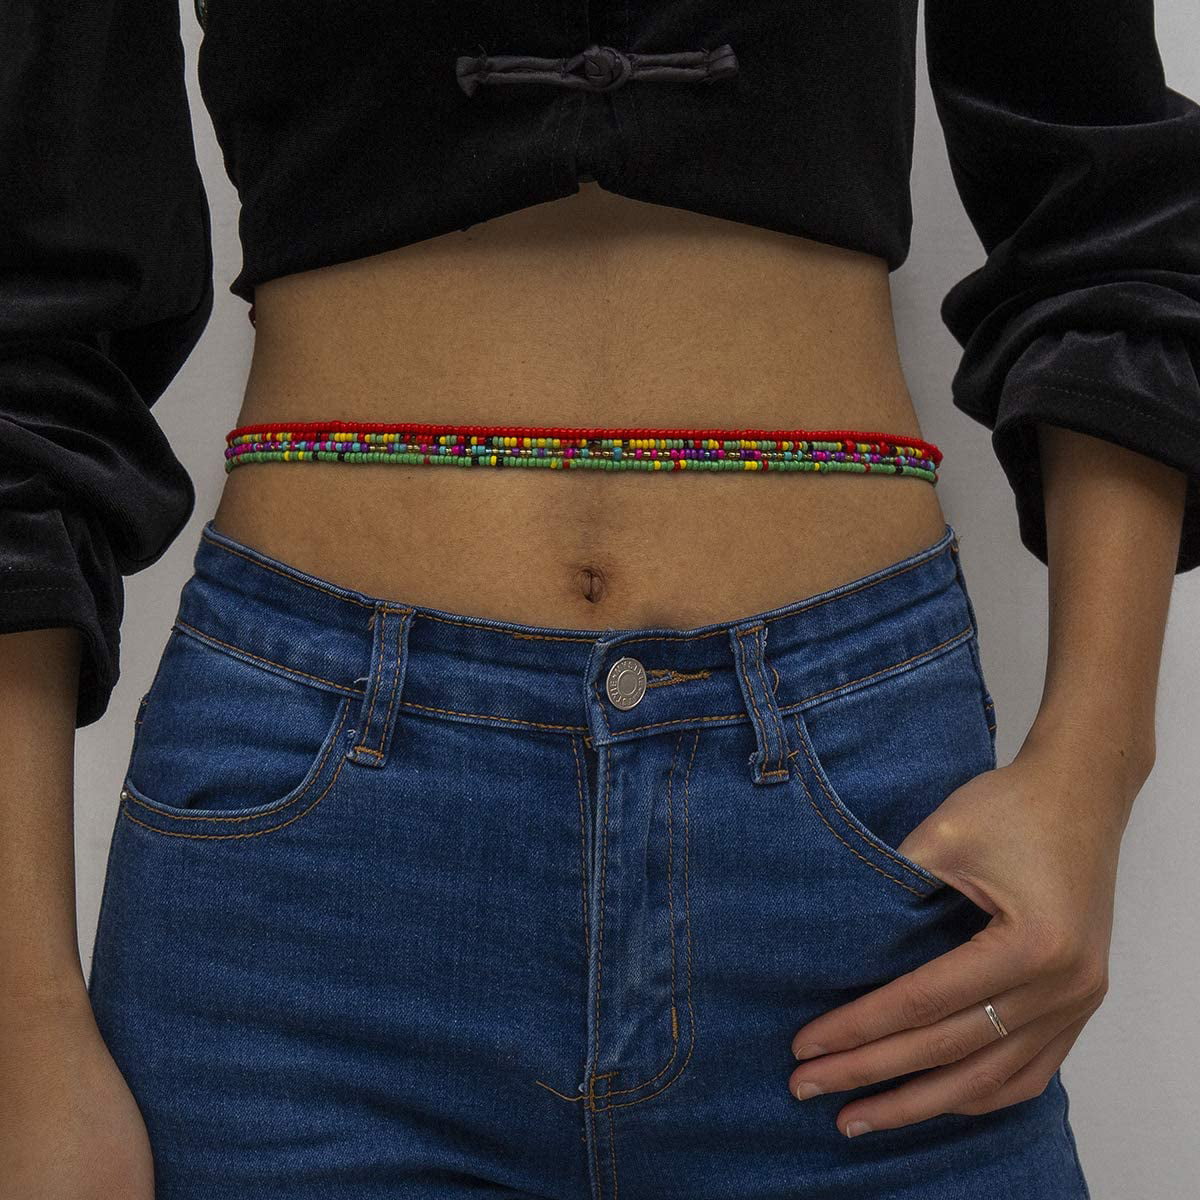 Waist Beads for Weight Loss Stretchy African Waist Beads for Women Belly  Beads Chain Plus Size with String and Charms